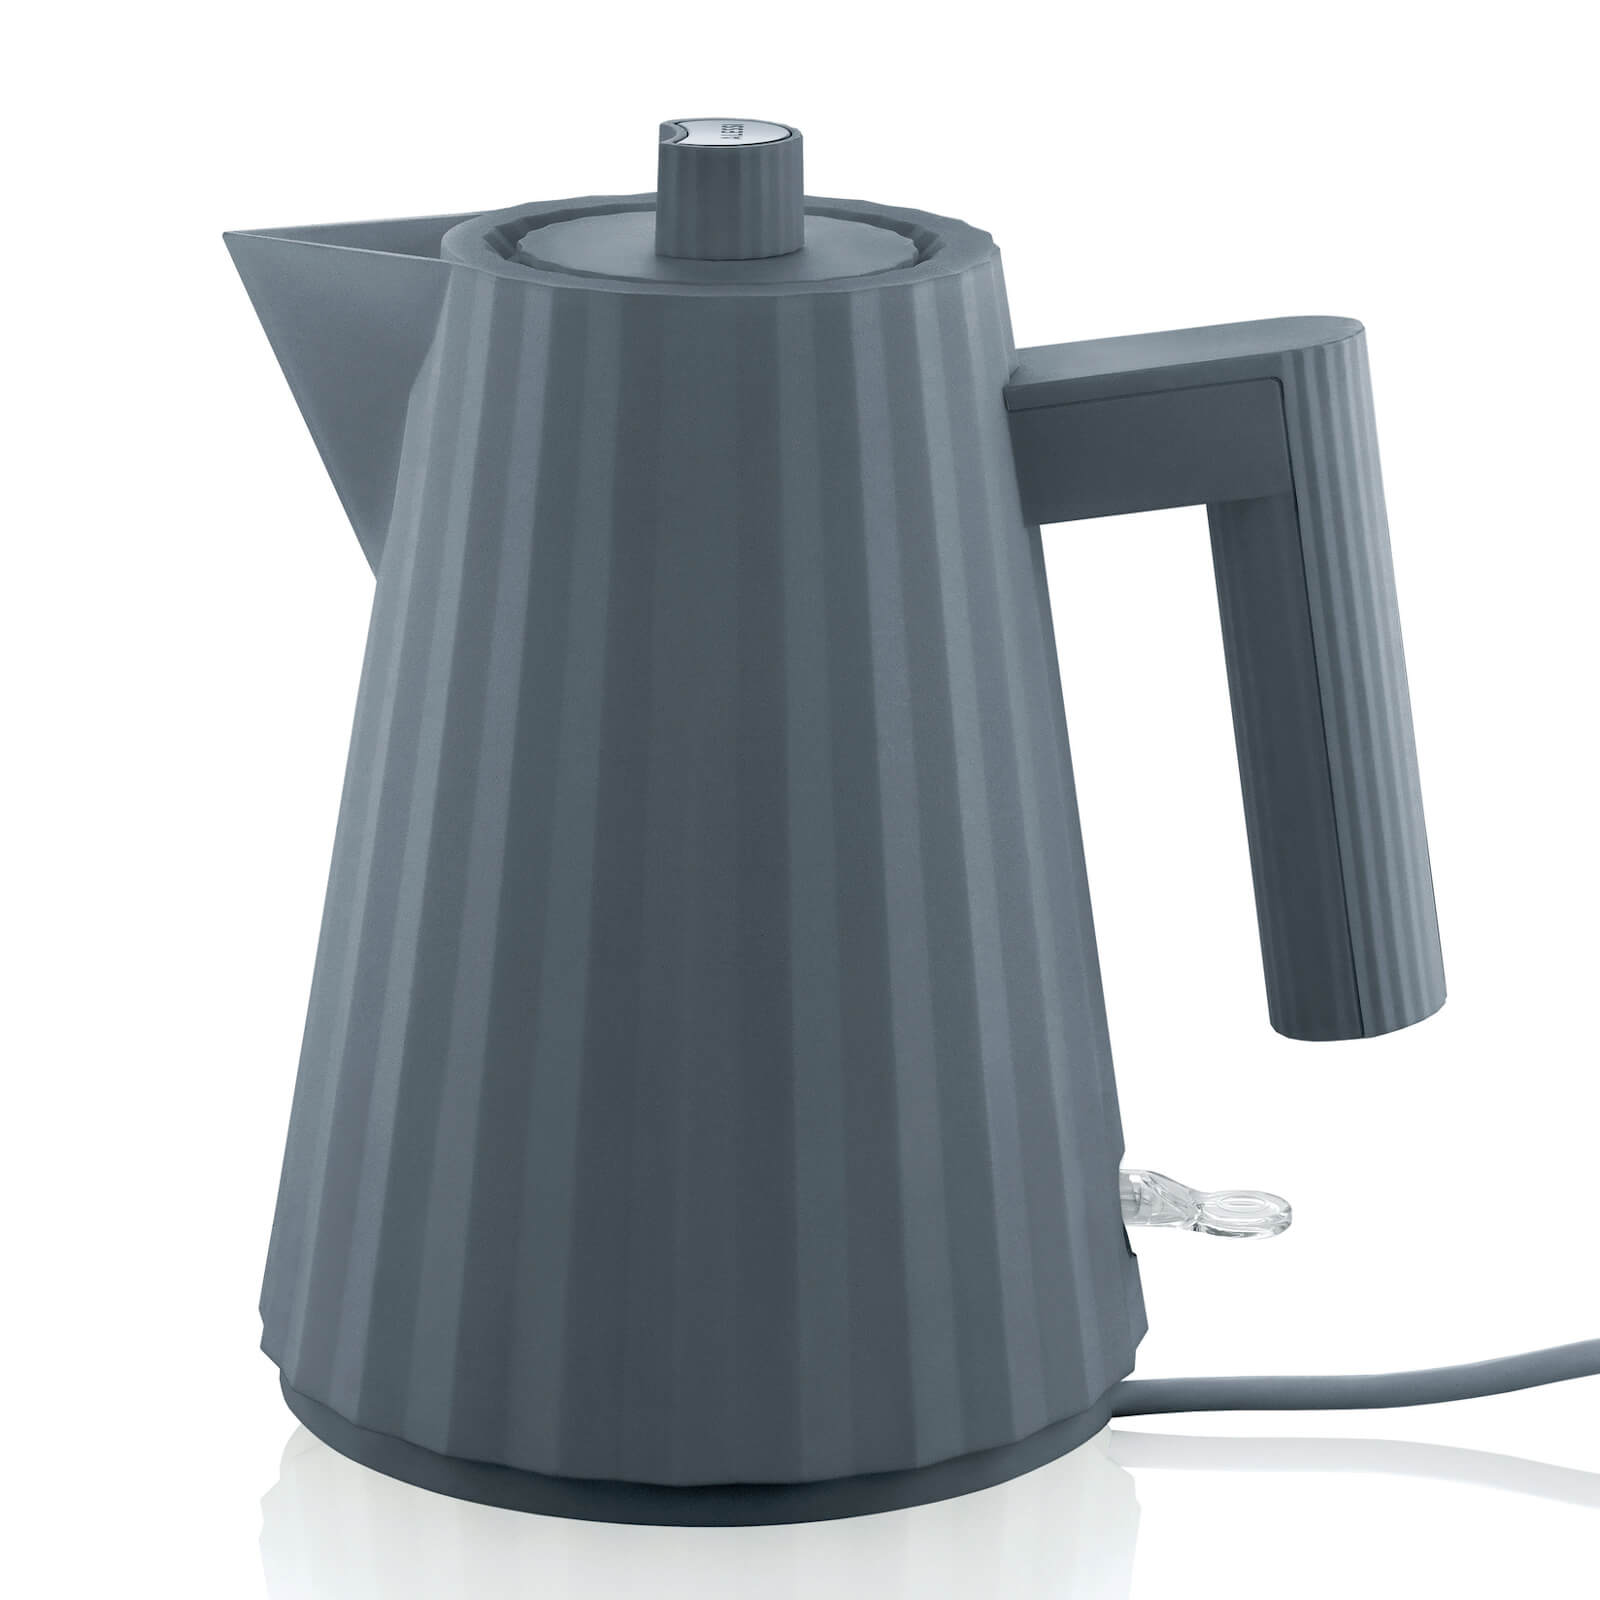 Image of Alessi Electric Kettle - Plisse Grey - 1.7L